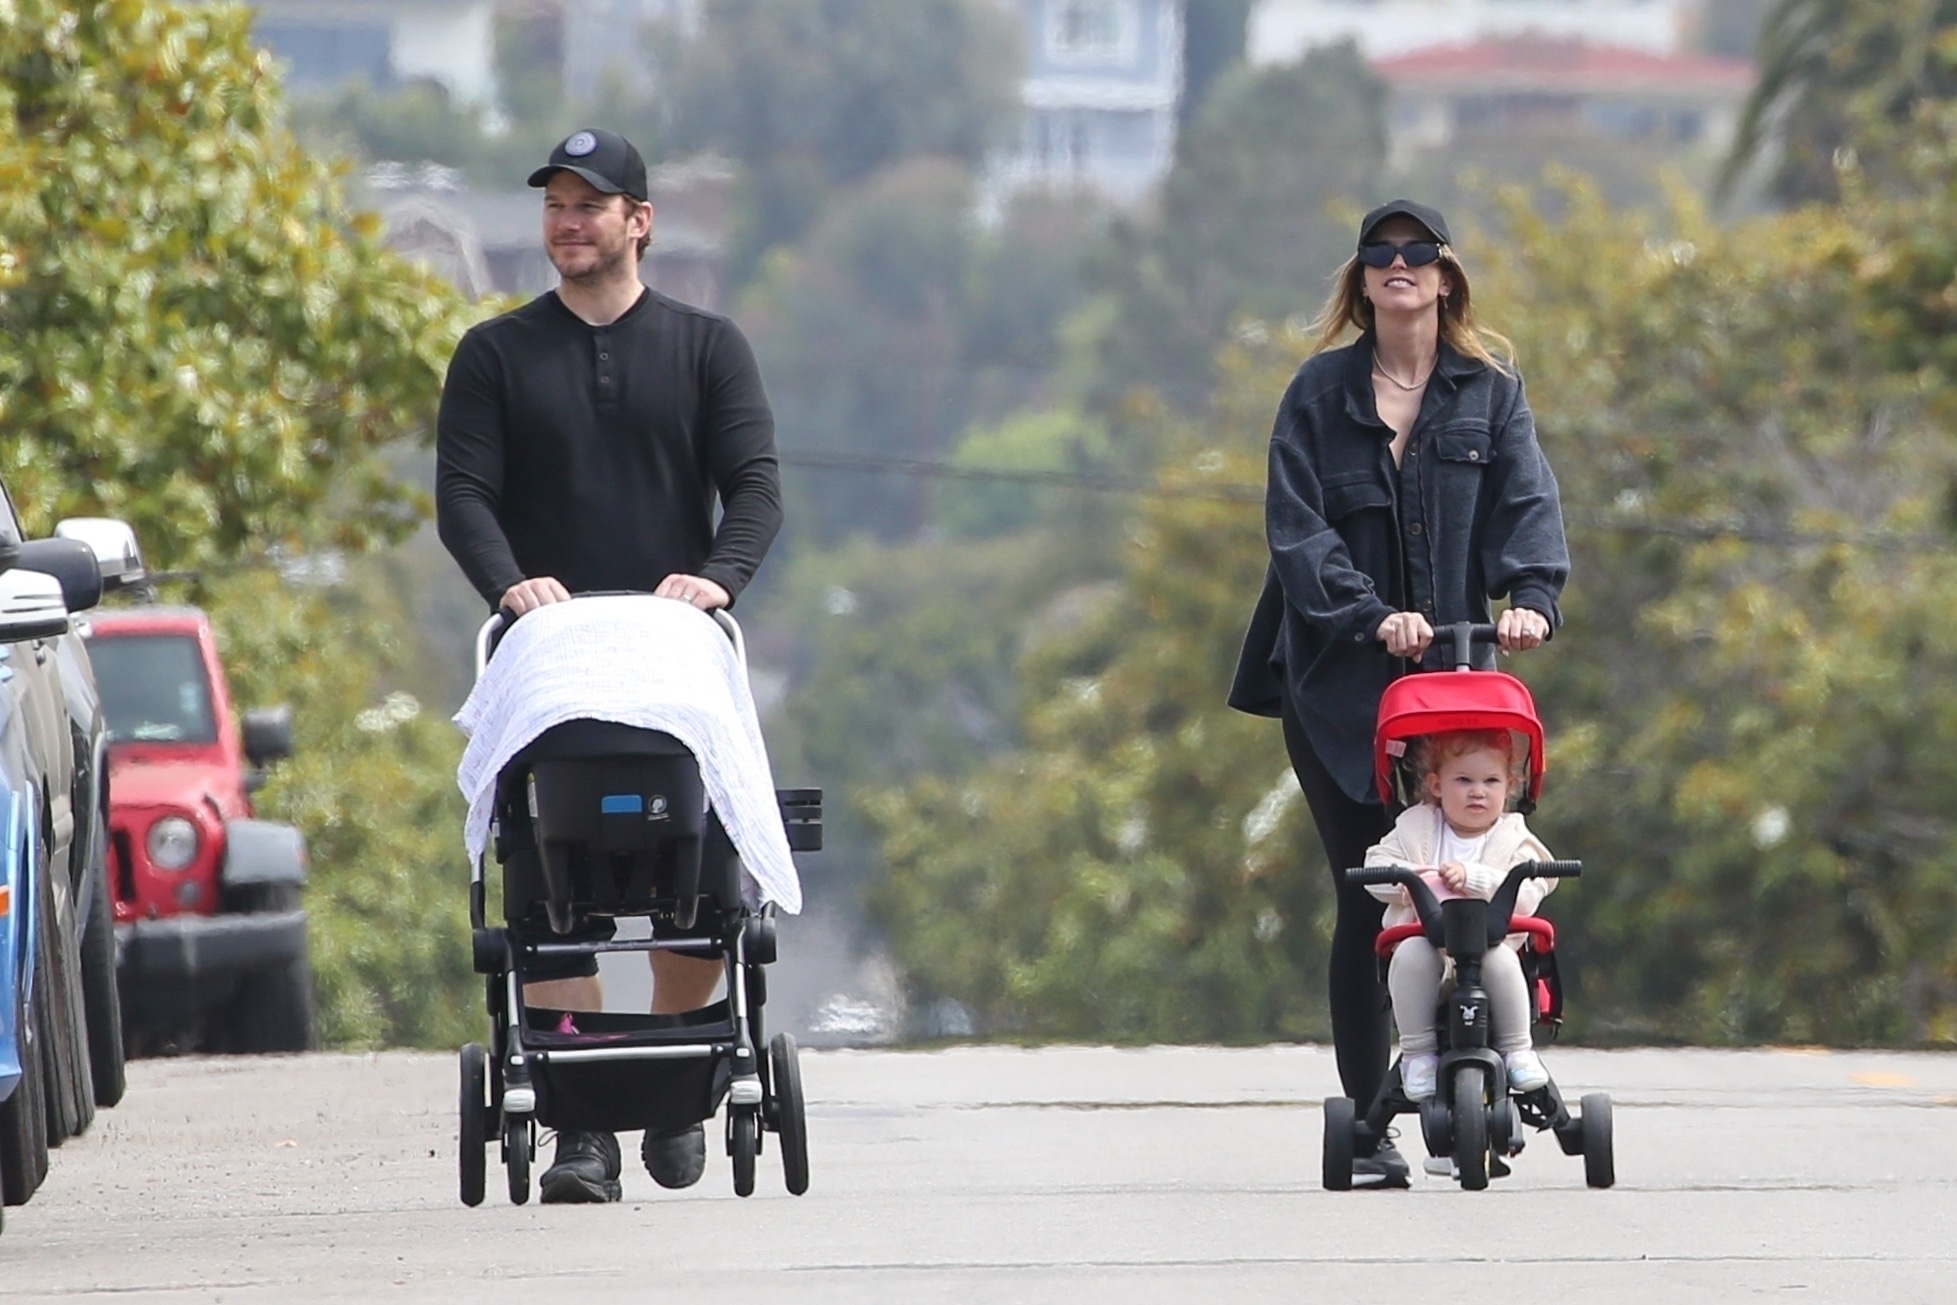 Family trip.  Katherine Schwarzenegger and Chris Pratt walked the streets of Santa Monica with their daughters Lyla and baby Eloise Christina, who was born less than a month ago.  This is the first public outing they have made since the arrival of the couple's second daughter